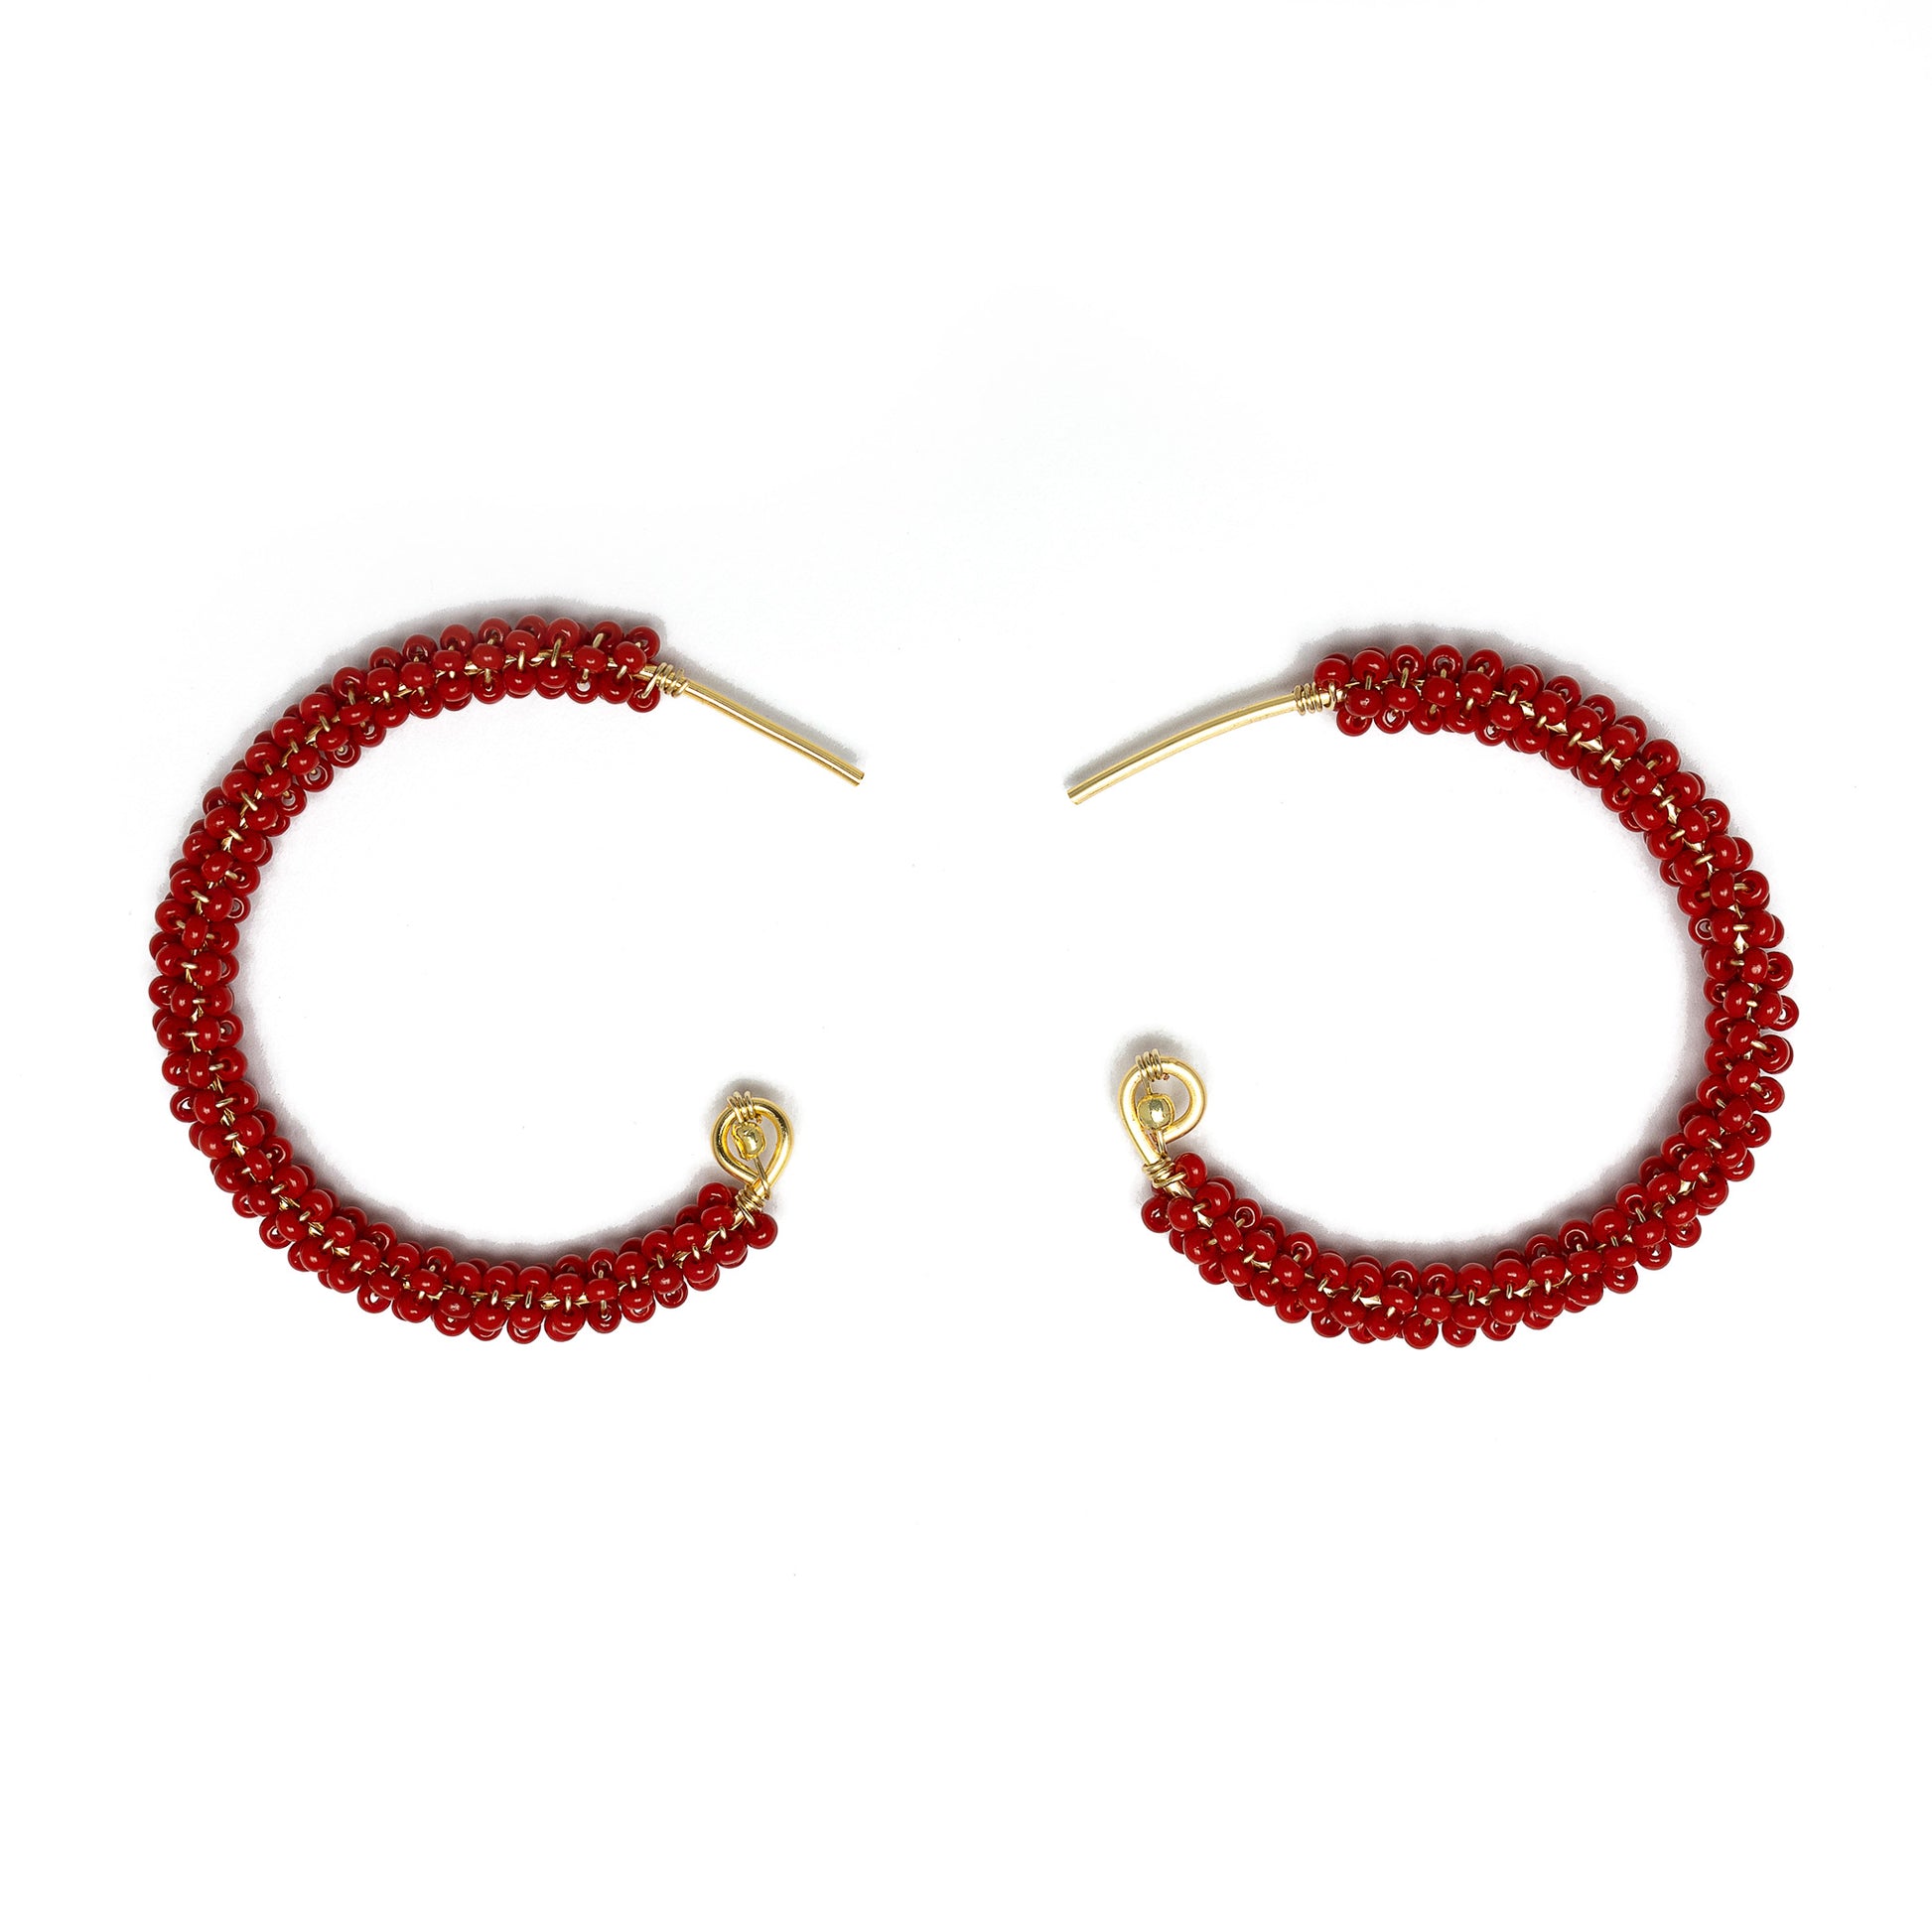 Florence gold Hoop Earrings are 1.5 inches long, Gold and Red Earrings. Wire Wrapped Earrings. Lightweight and comfortable earrings. Handmade for women. Open hoop earrings.